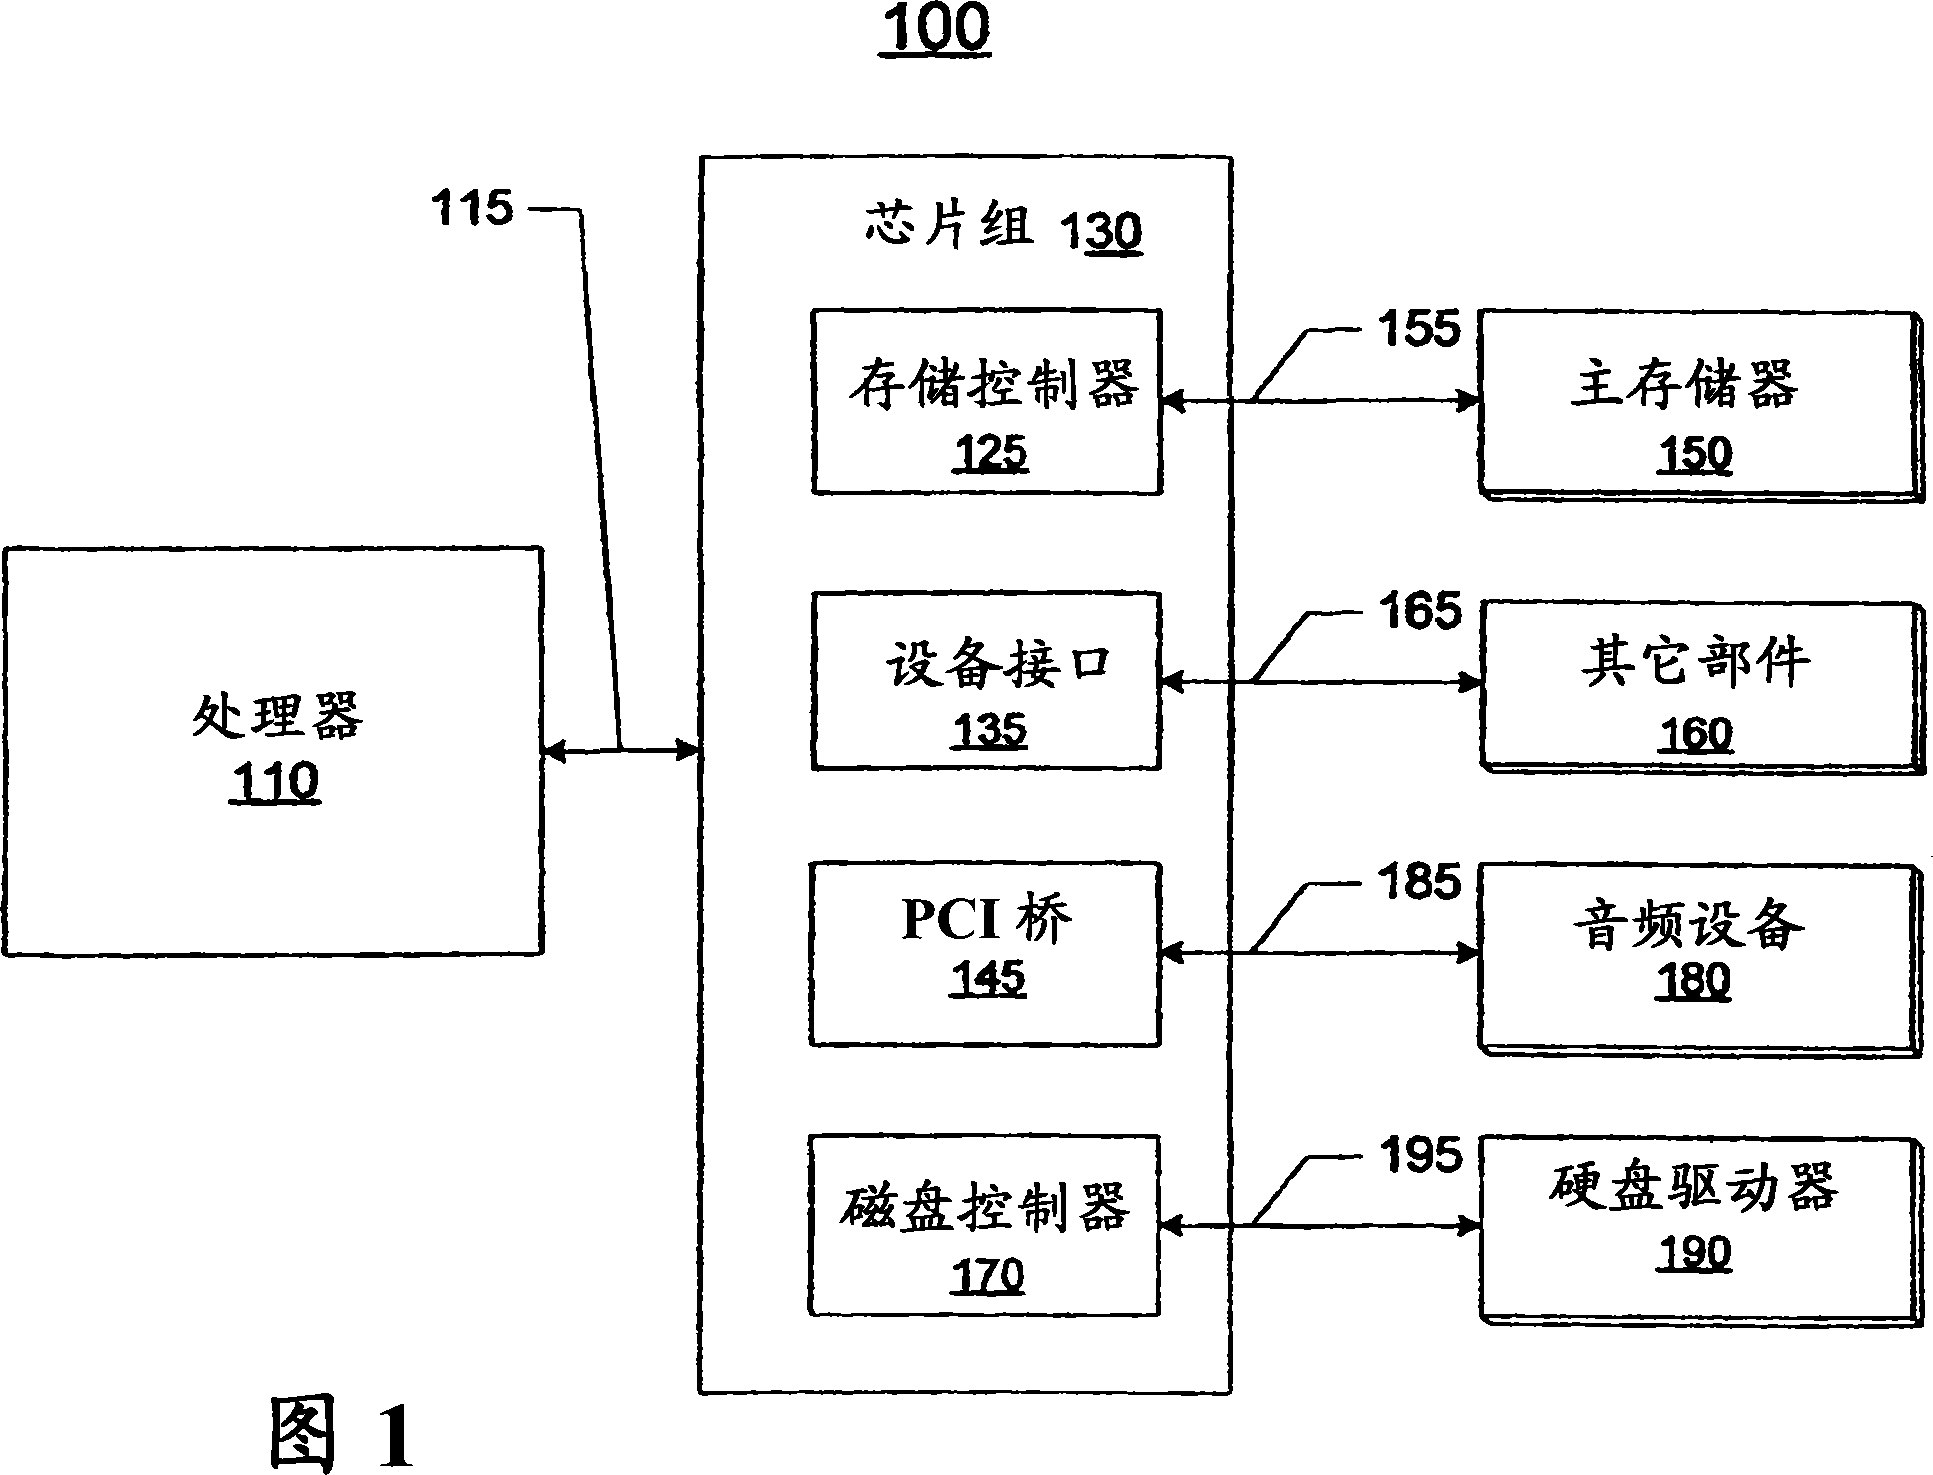 Method and apparatus for saving power for a computing system by providing instant-on resuming from a hibernation state